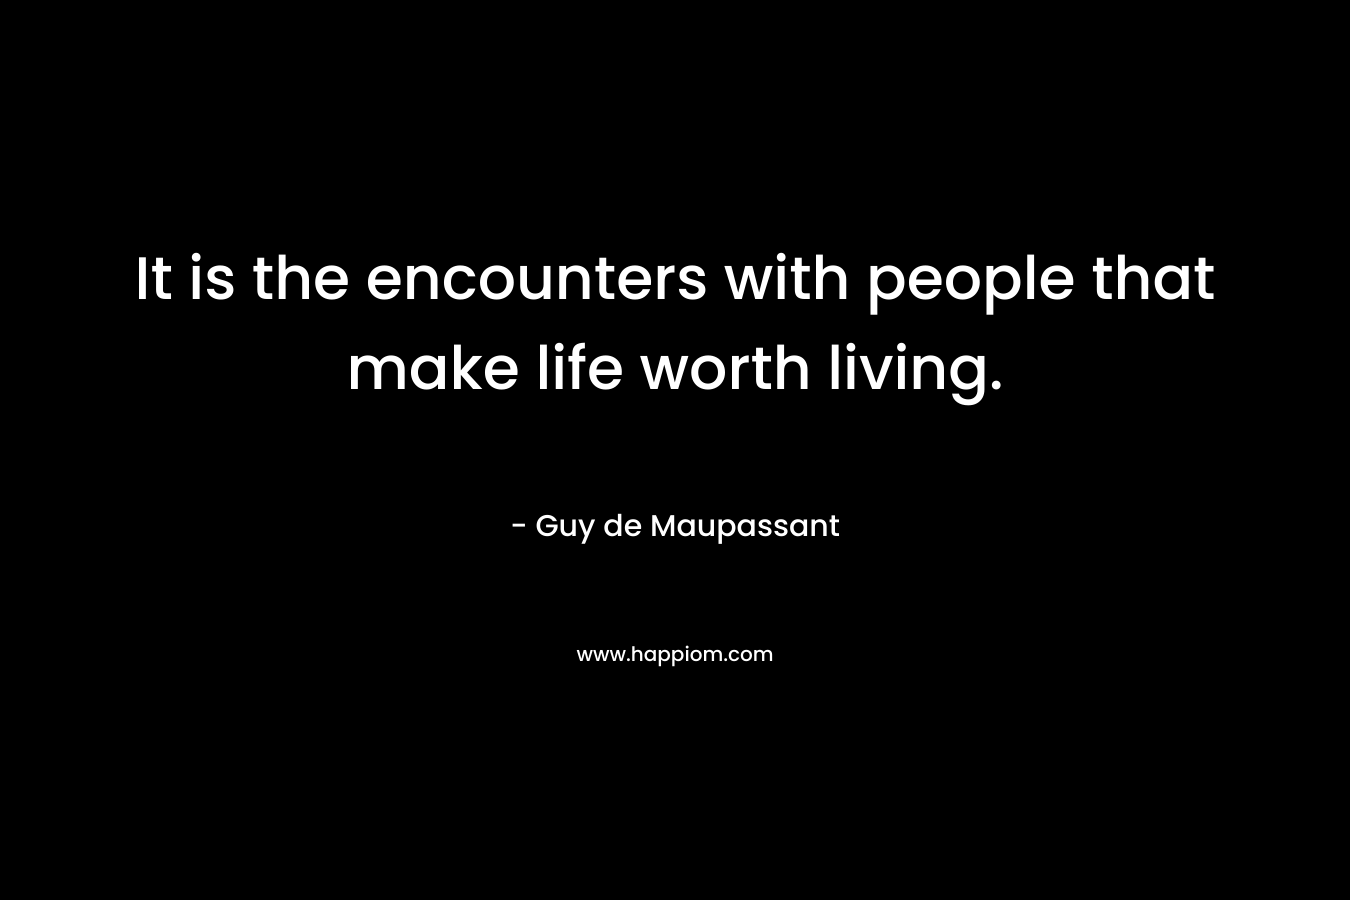 It is the encounters with people that make life worth living.